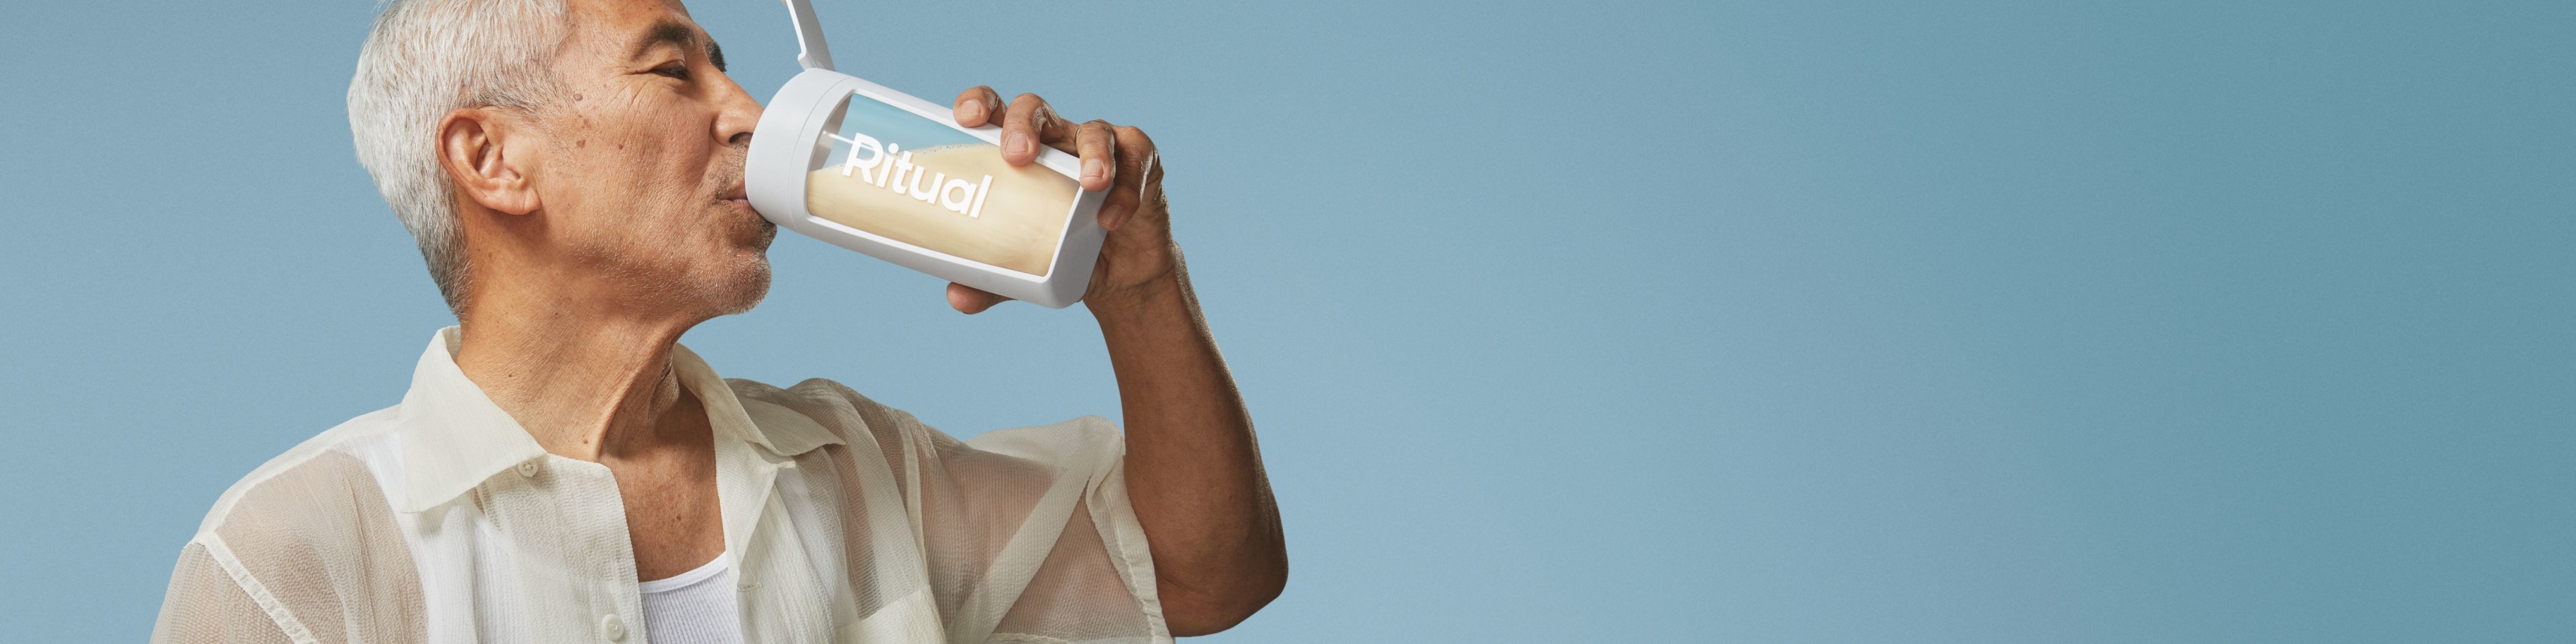 As we age, muscle breakdown naturally increases. We explain how nutrient needs evolve over time, and why dietary protein plays such a crucial role in supporting healthy, active aging—along with some simple suggestions for upping your intake. 